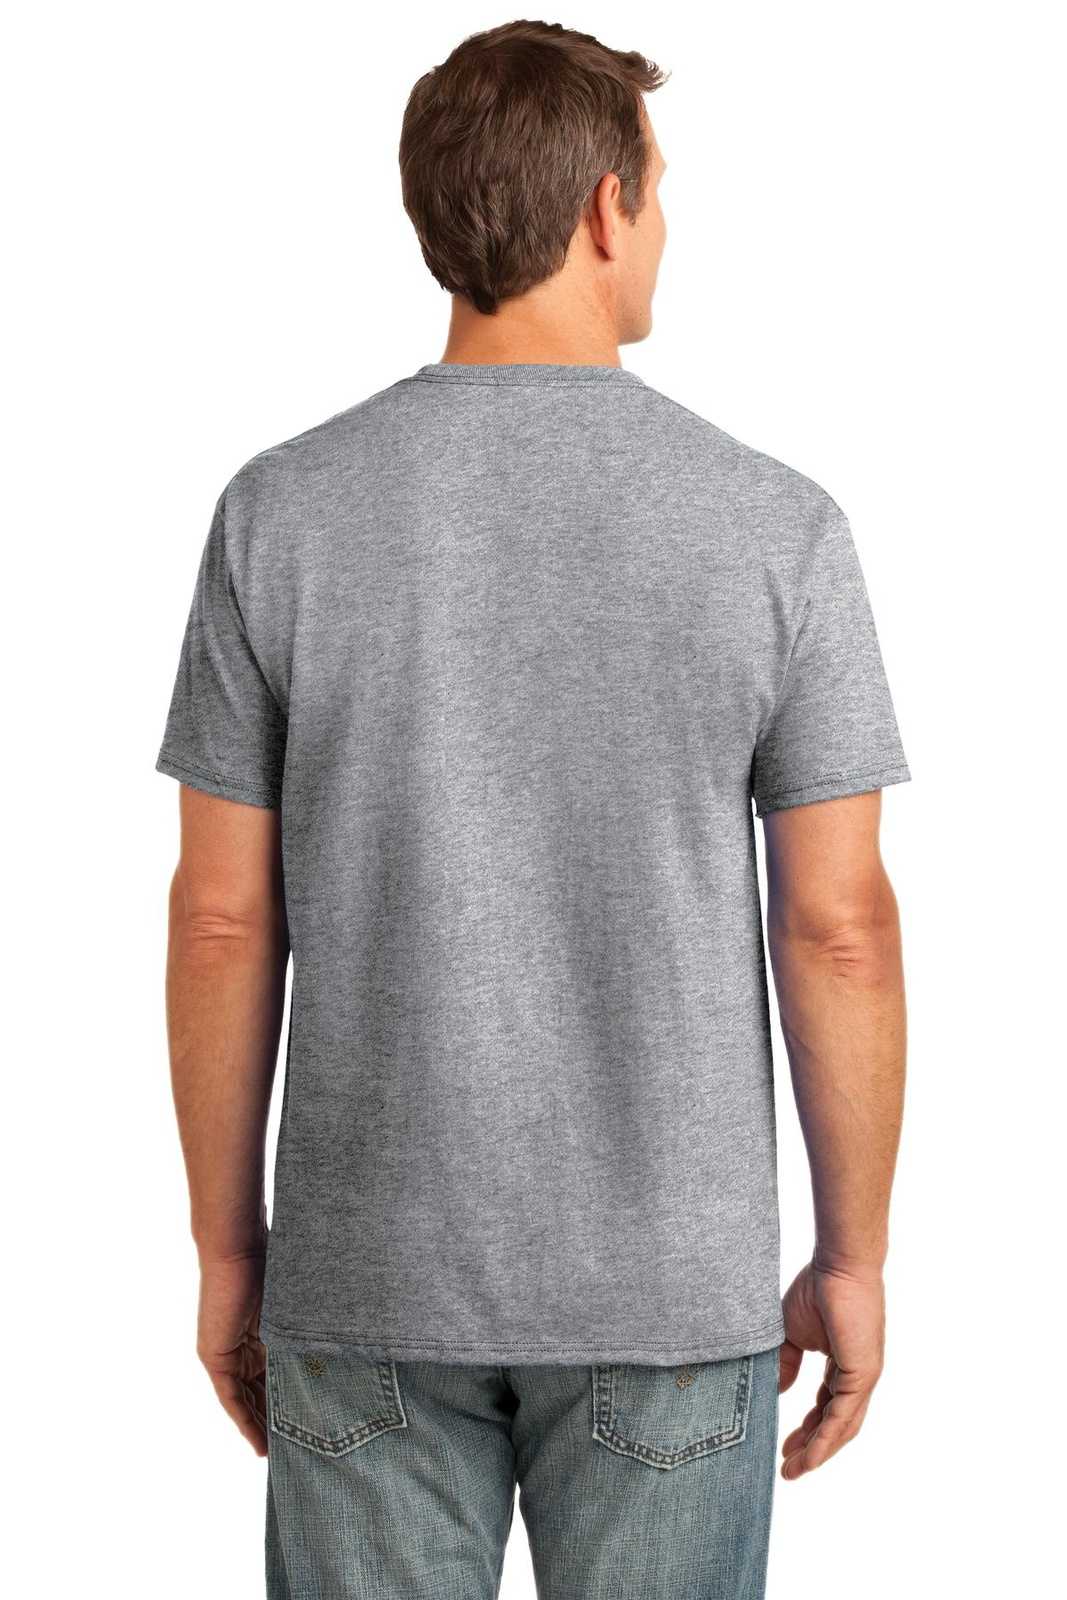 Port & Company PC54P Core Cotton Pocket Tee - Athletic Heather - HIT a Double - 1